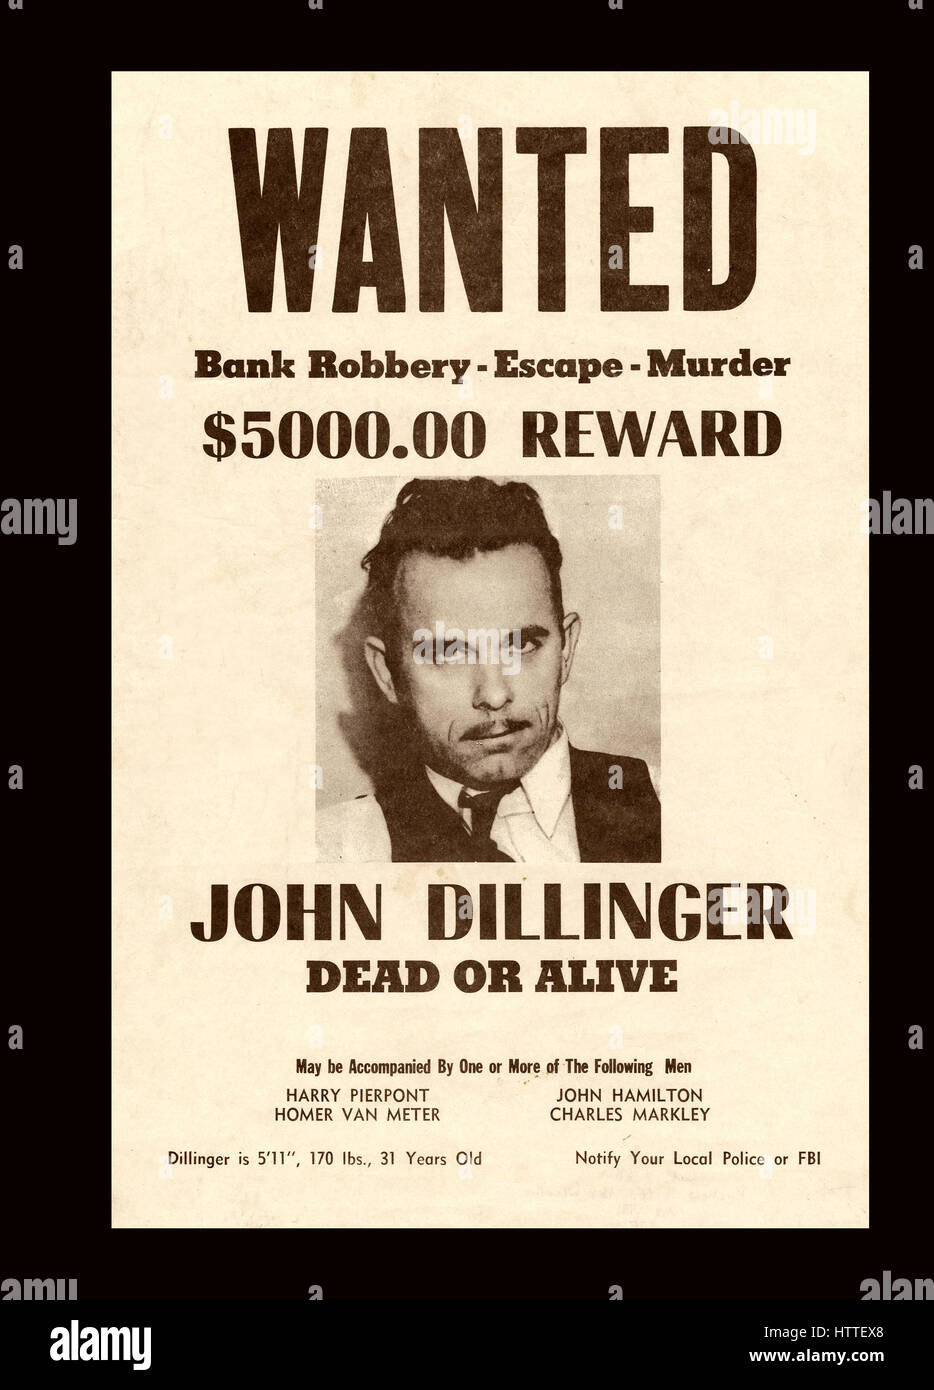 John Dillinger Wanted Dead or Alive vintage retro poster Stock Photo